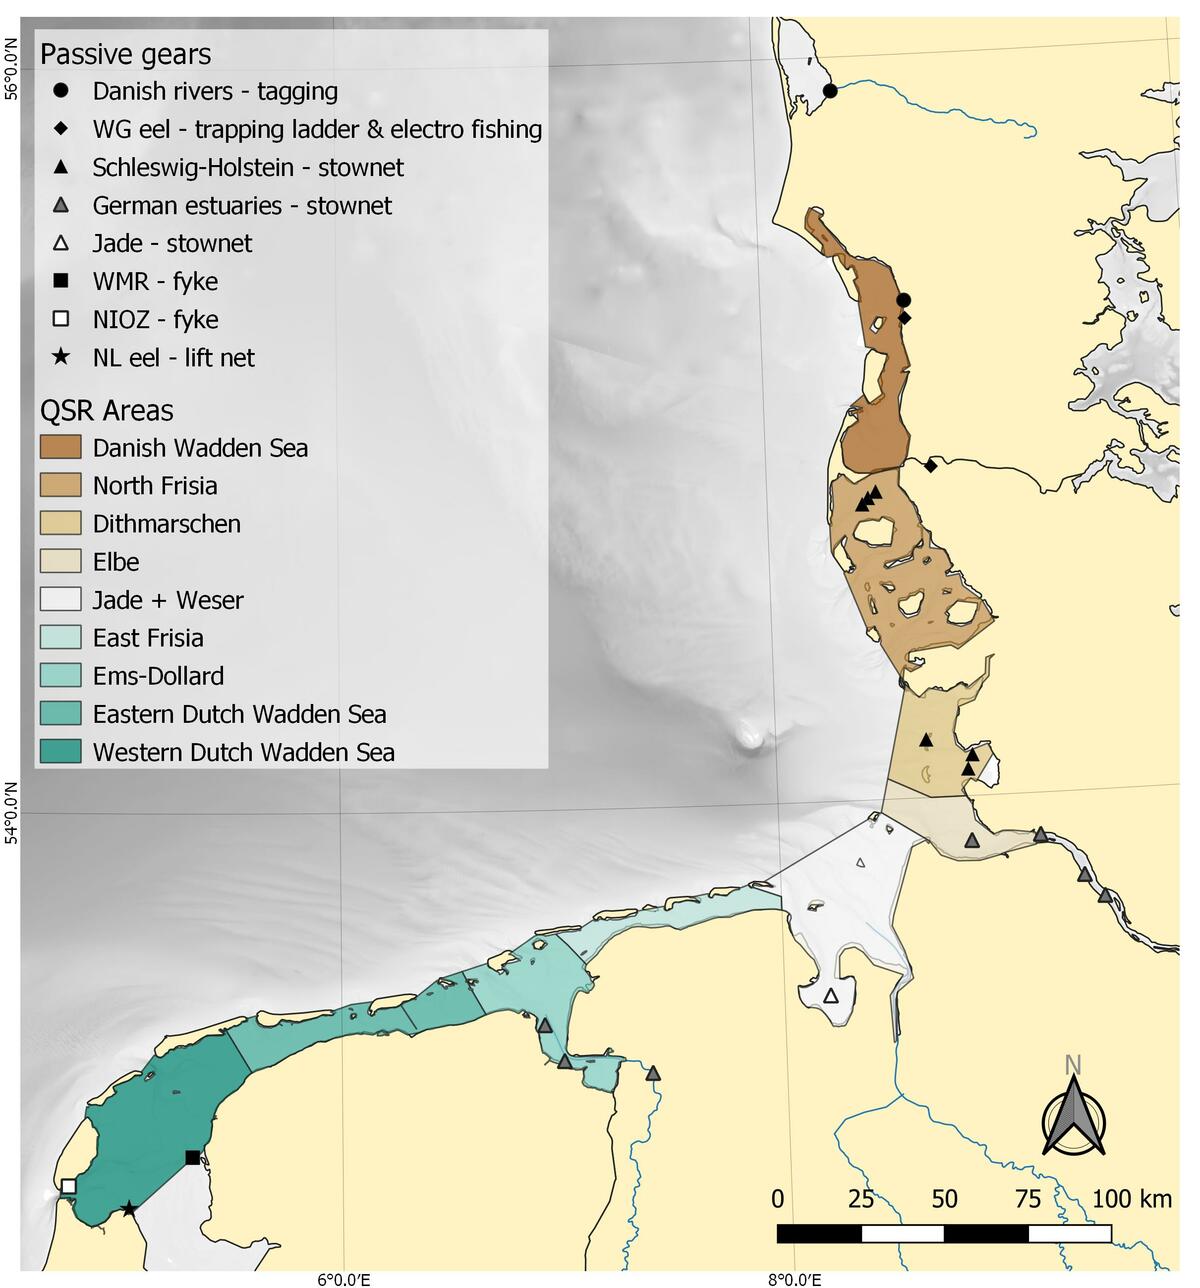 Figure 2. Map of the sampling areas and locations. The beam trawl surveys cover all sampling areas except the Danish Wadden Sea. The sampling locations of passive gears, and the Danish rivers included in the tagging programme are indicated by symbols. The background colours of the sampling areas correspond with the strip colours in the trend figures.